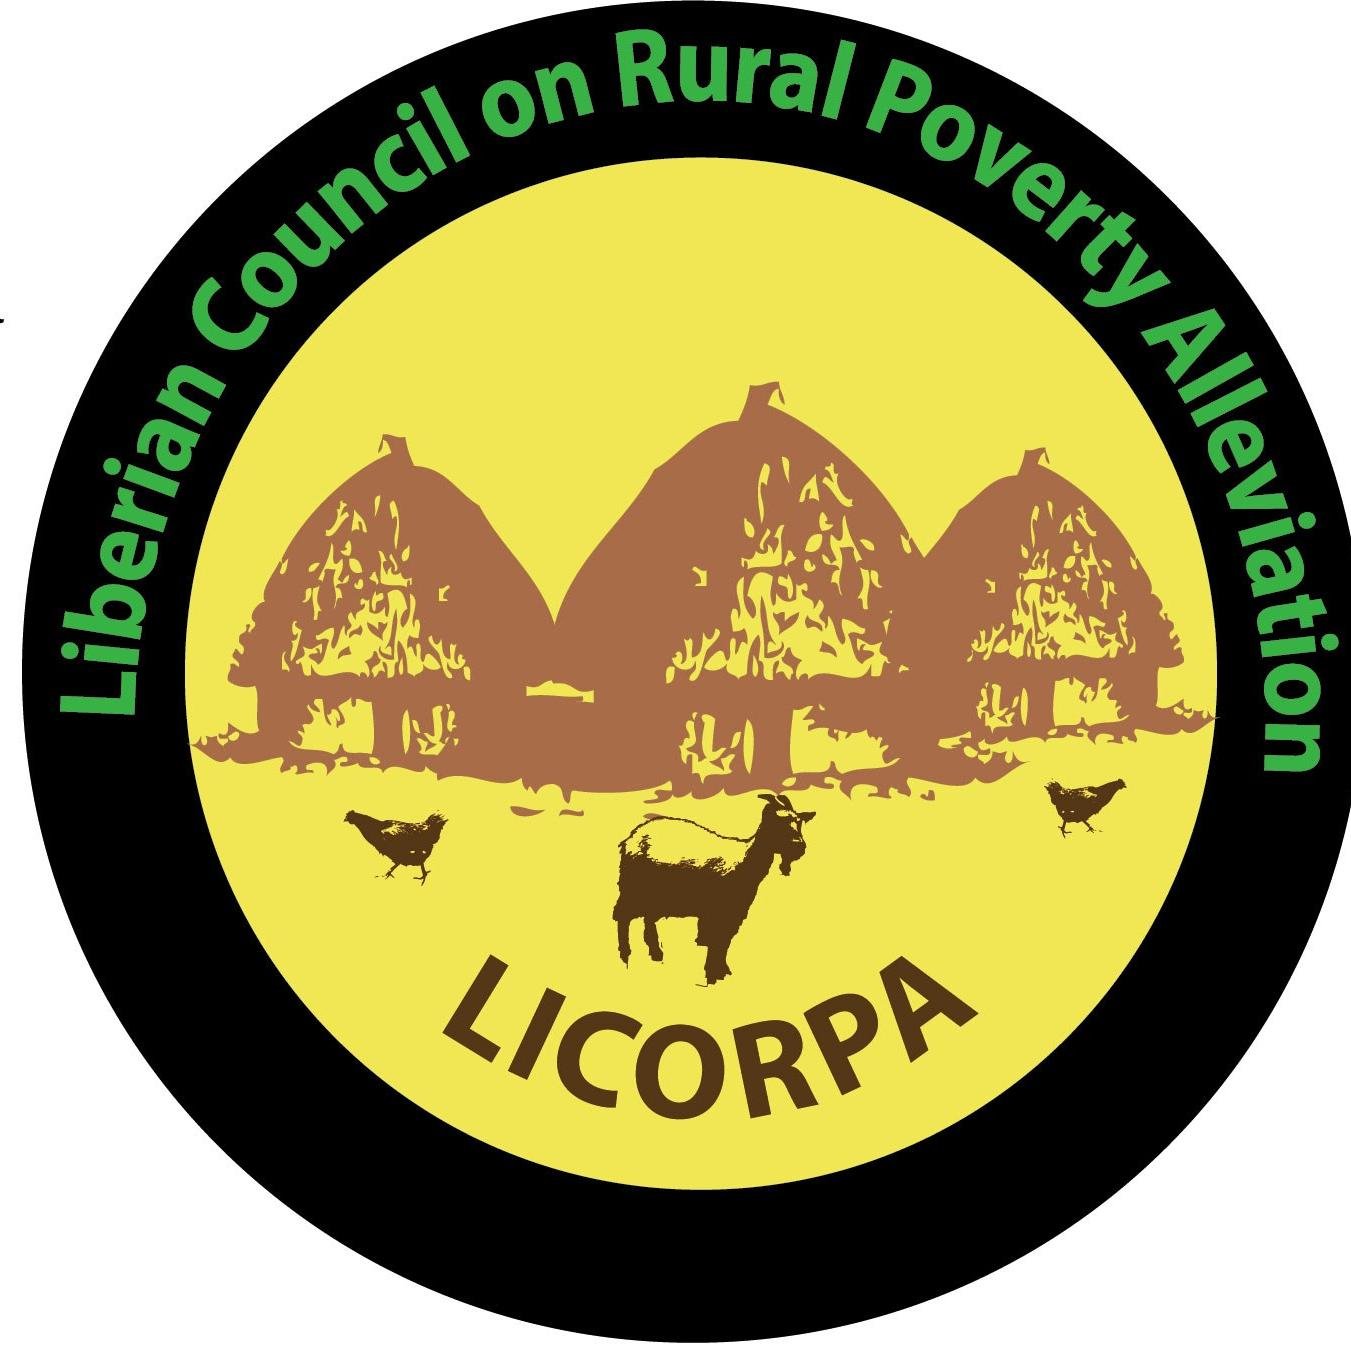 Liberian Council on Rural Poverty Alleviation is a local Liberian non-profit organization established to help the poor create live above poverty.